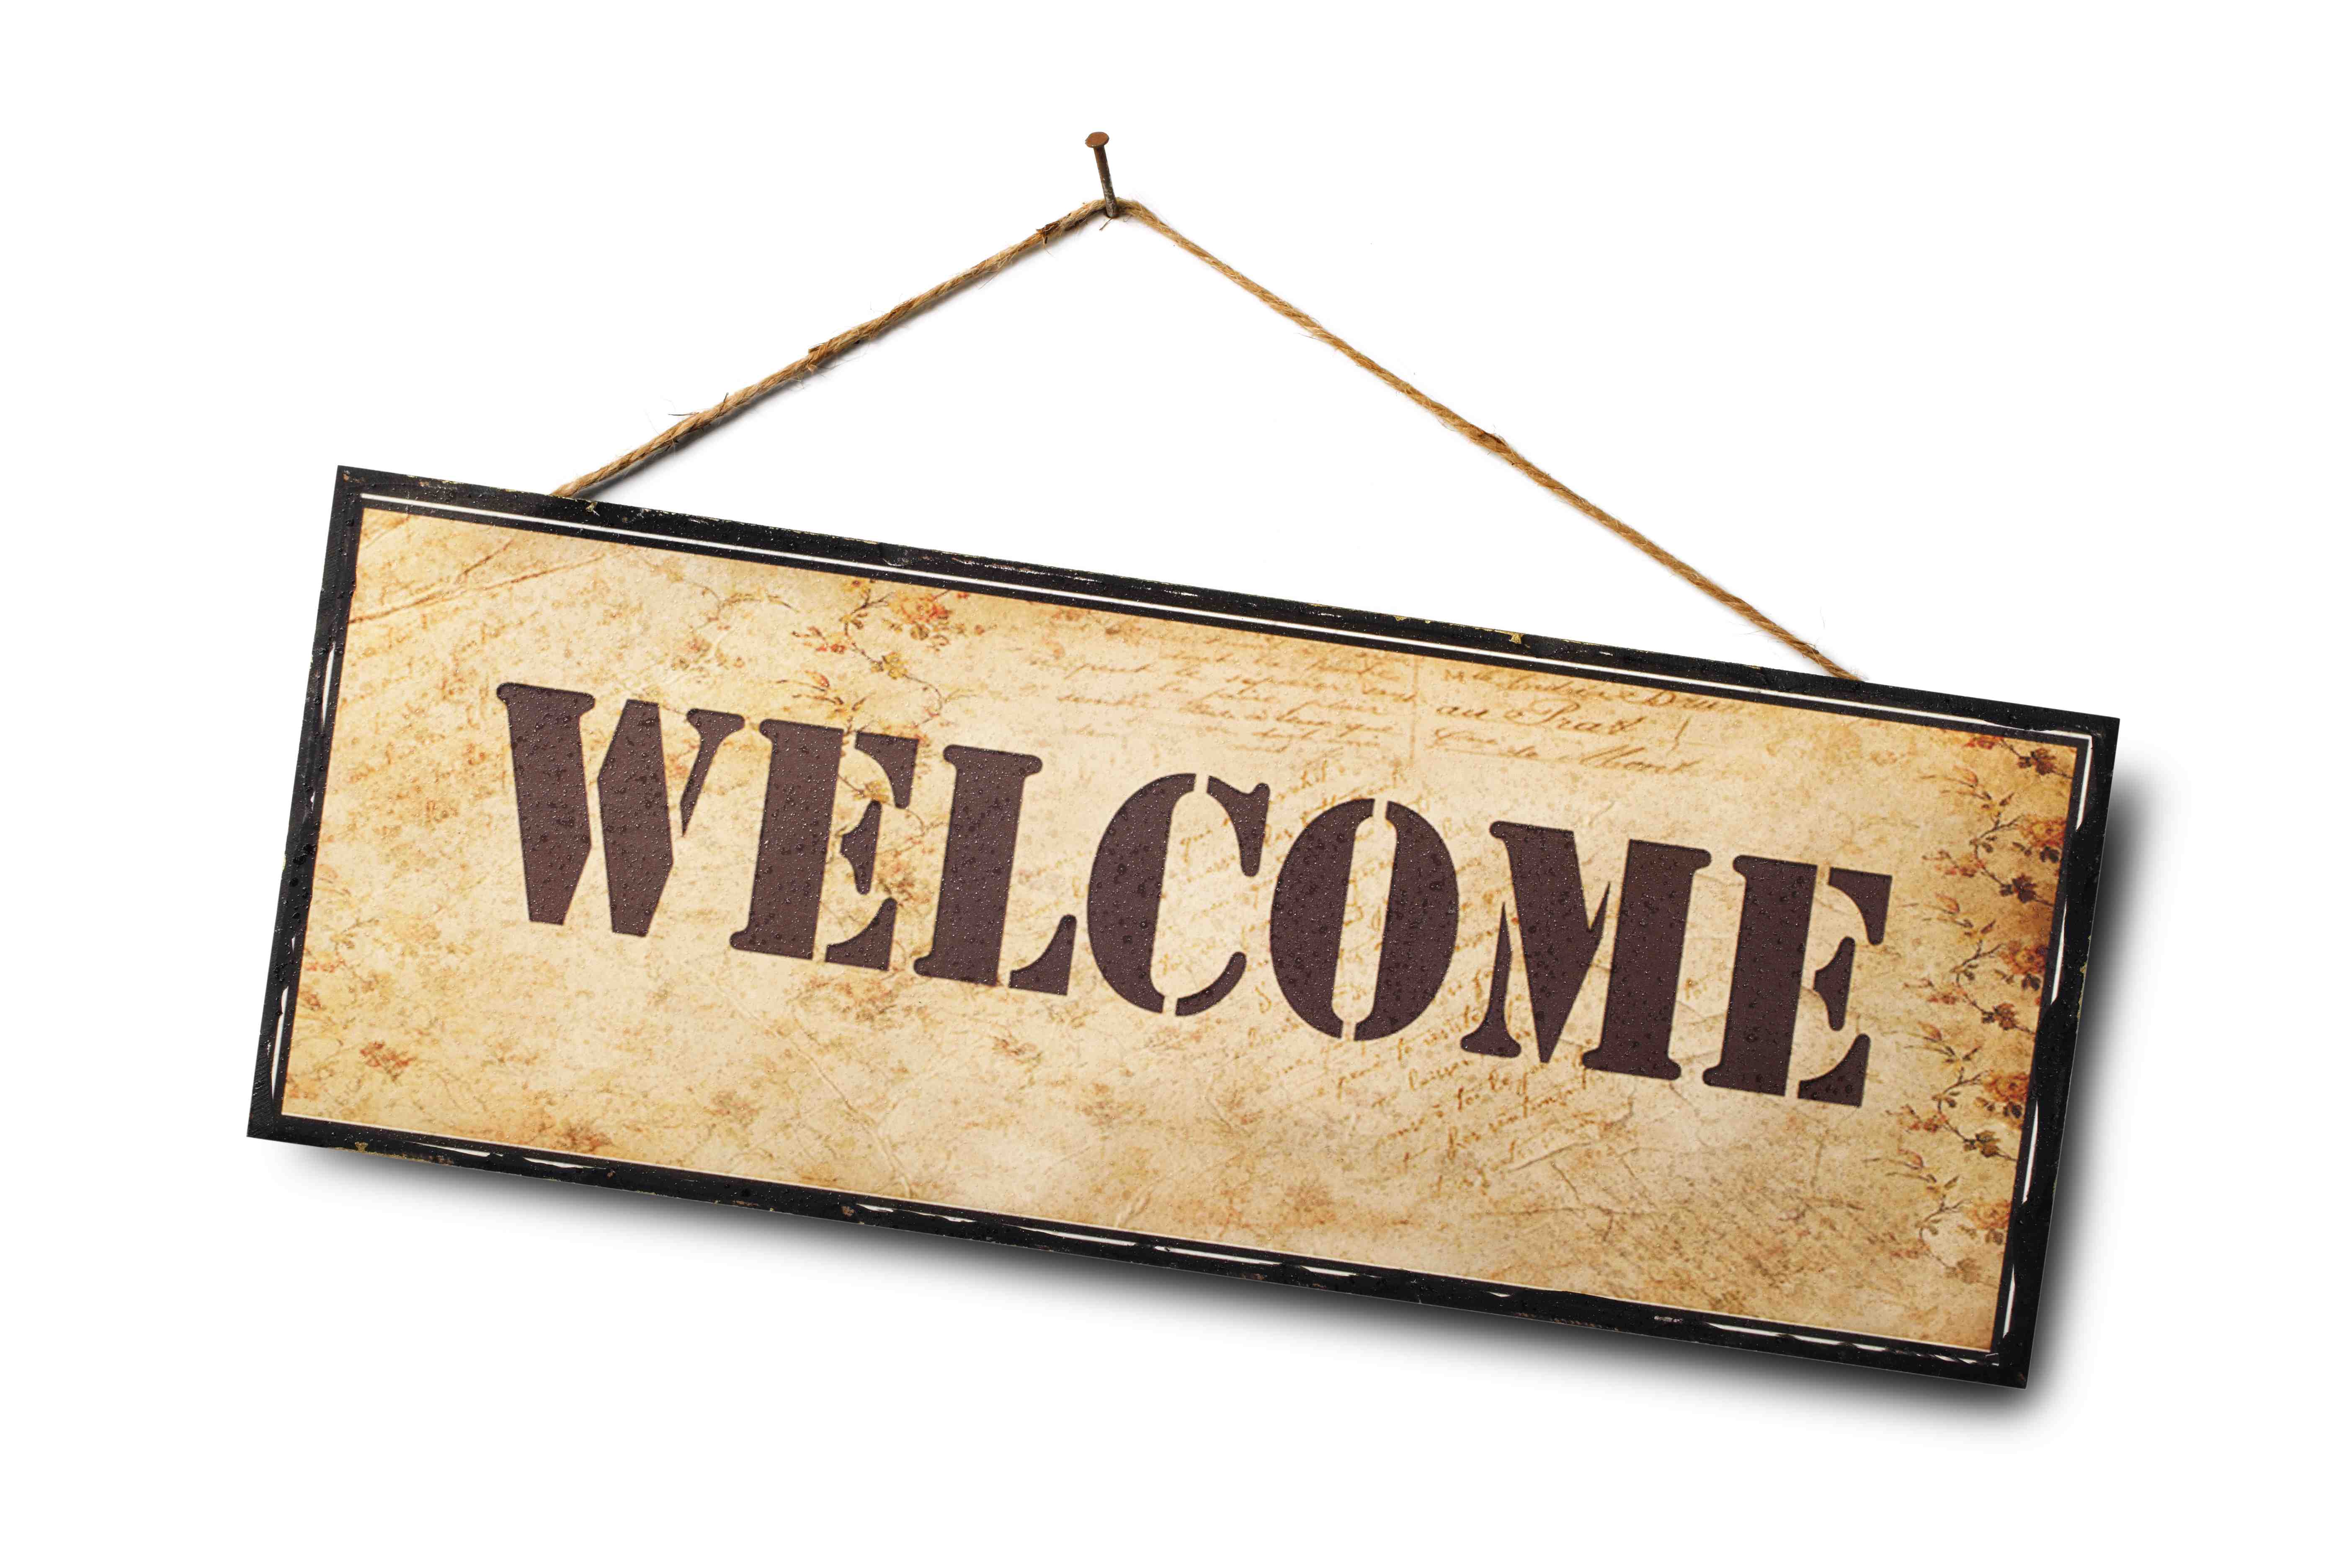 welcome.jpg  by BudgetGeneral